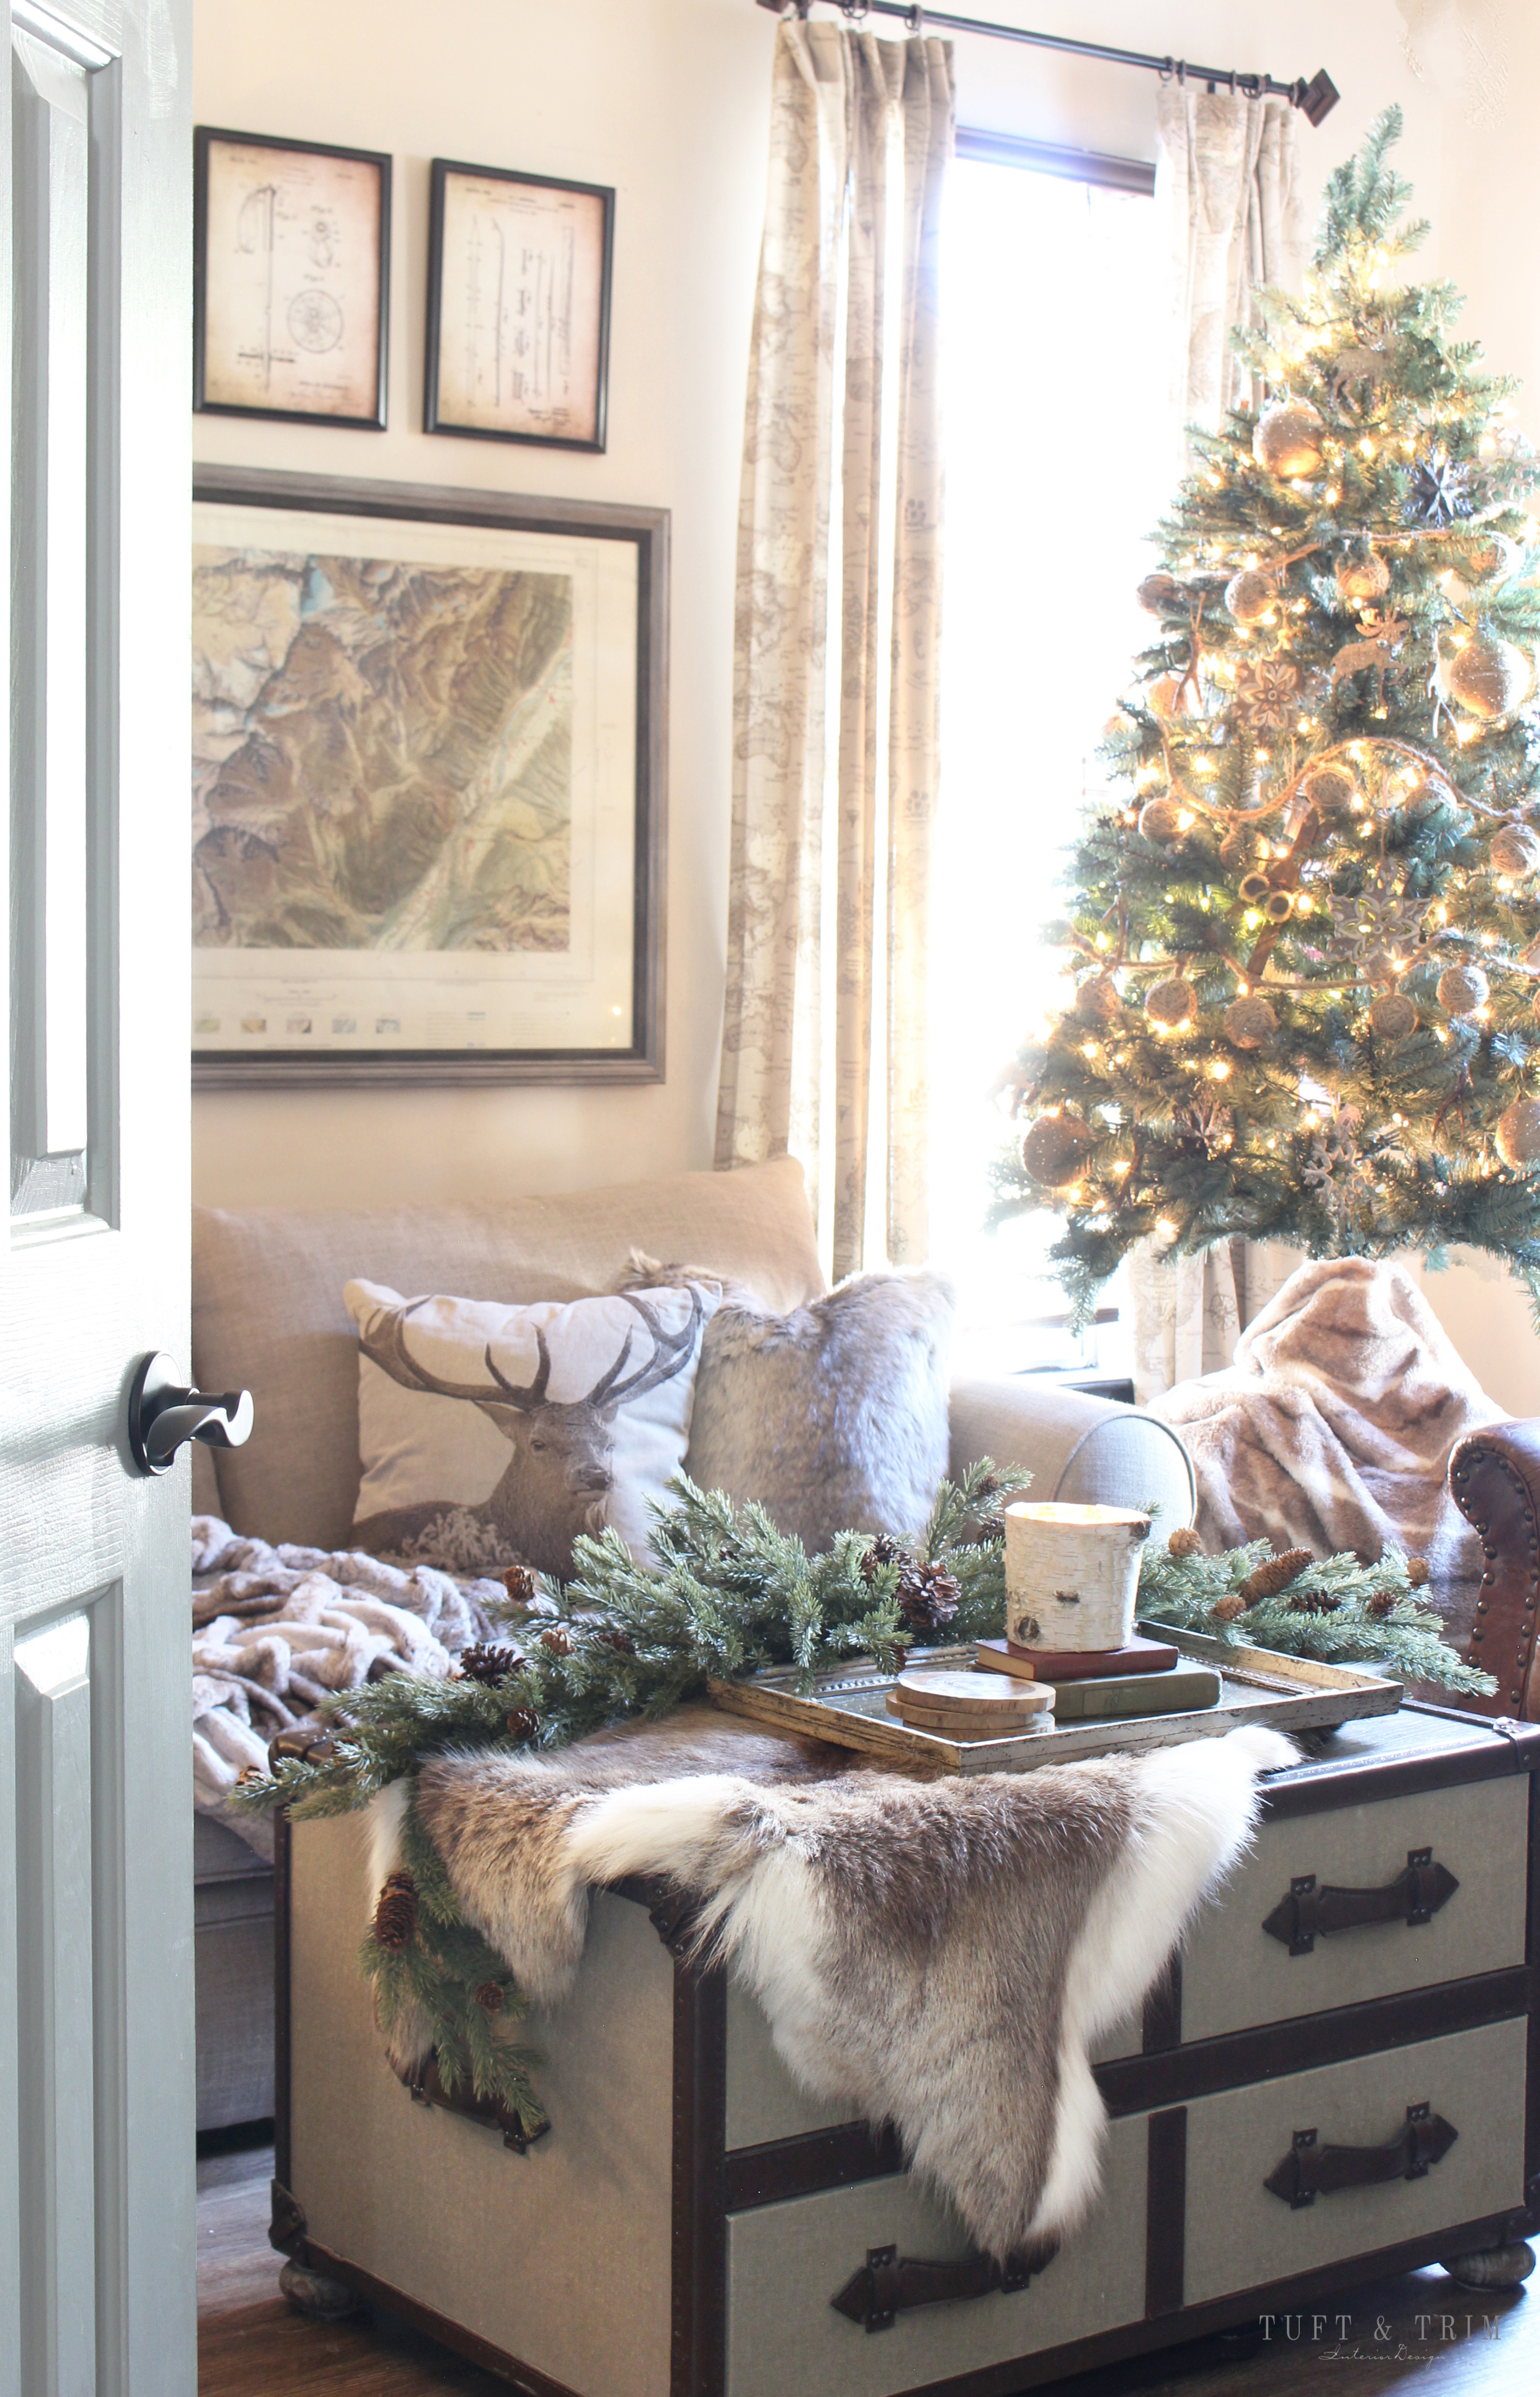 Rustic and Cozy Holiday Neutrals with Tuft & Trim Interior Design